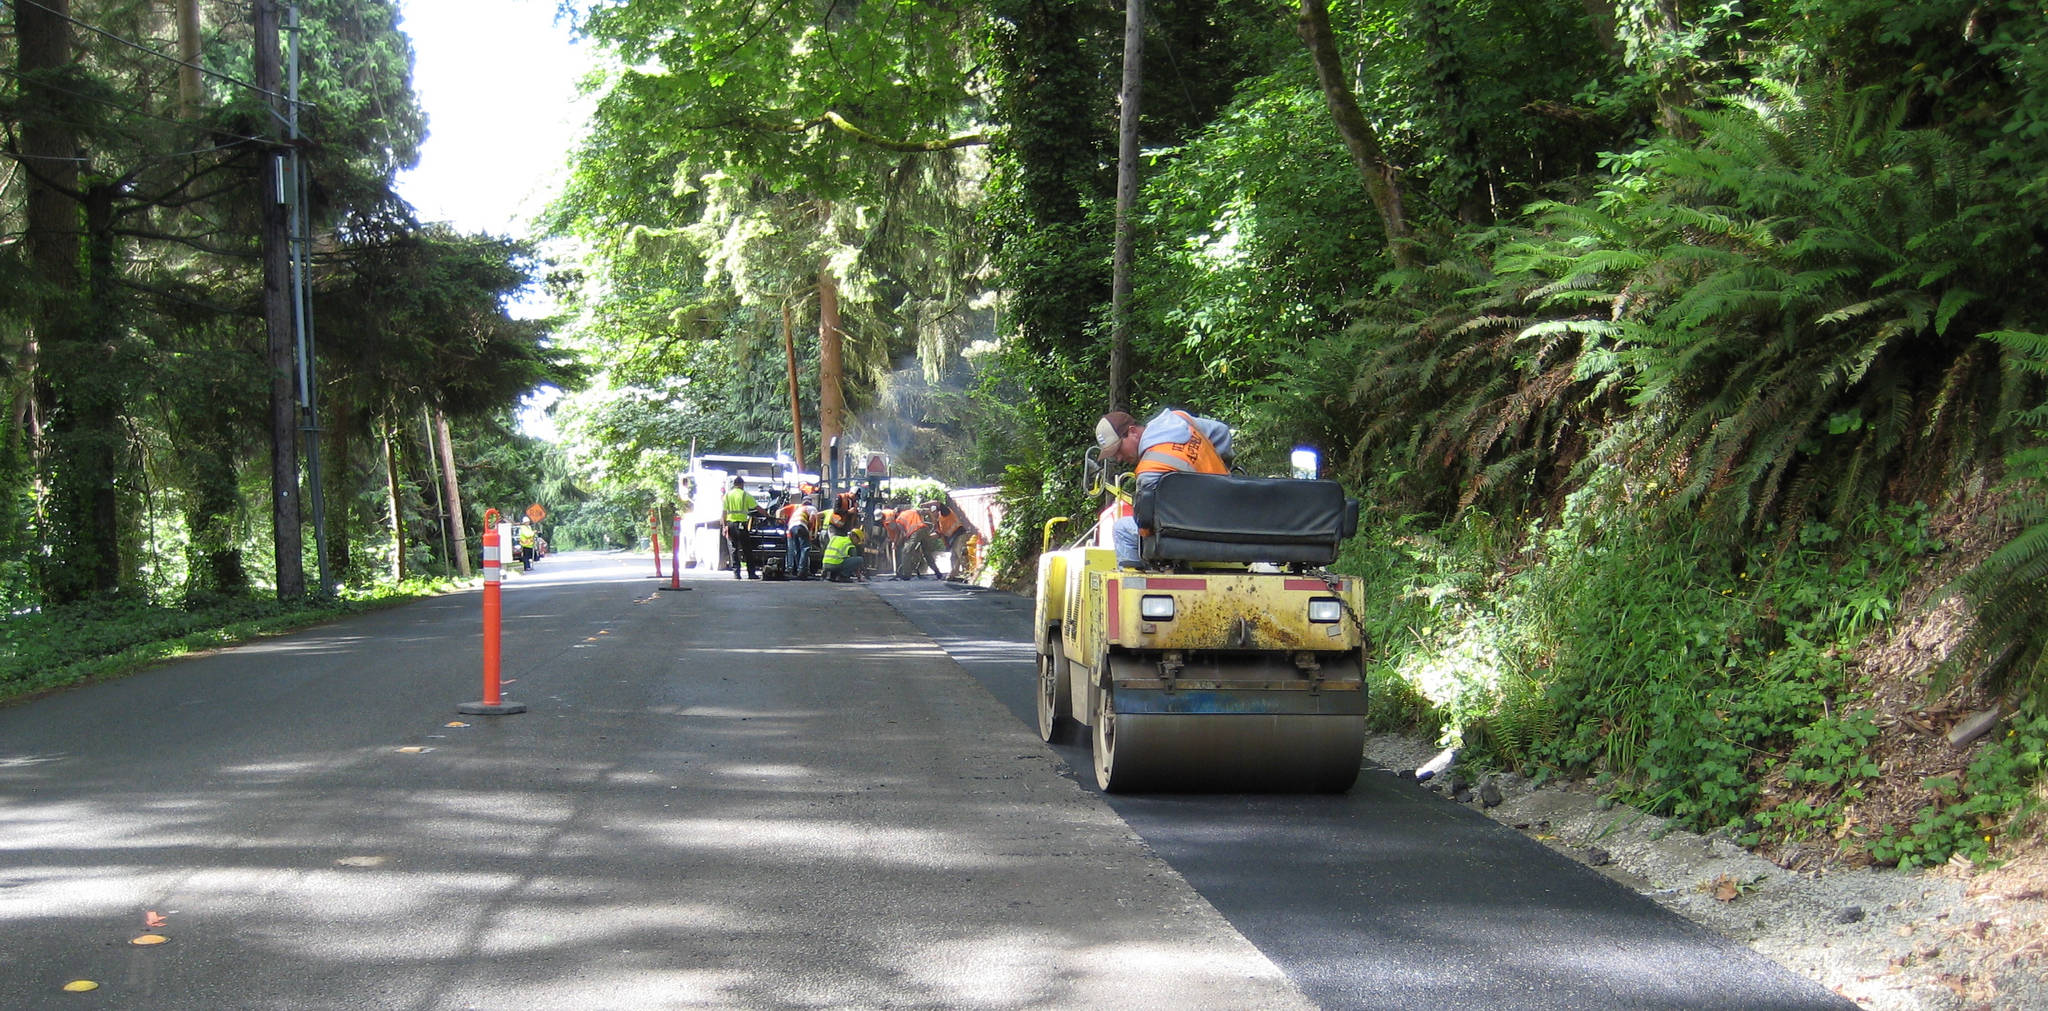 Construction takes place on one of the city’s East Mercer Way roadside shoulder paving projects. Courtesy of the city of Mercer Island